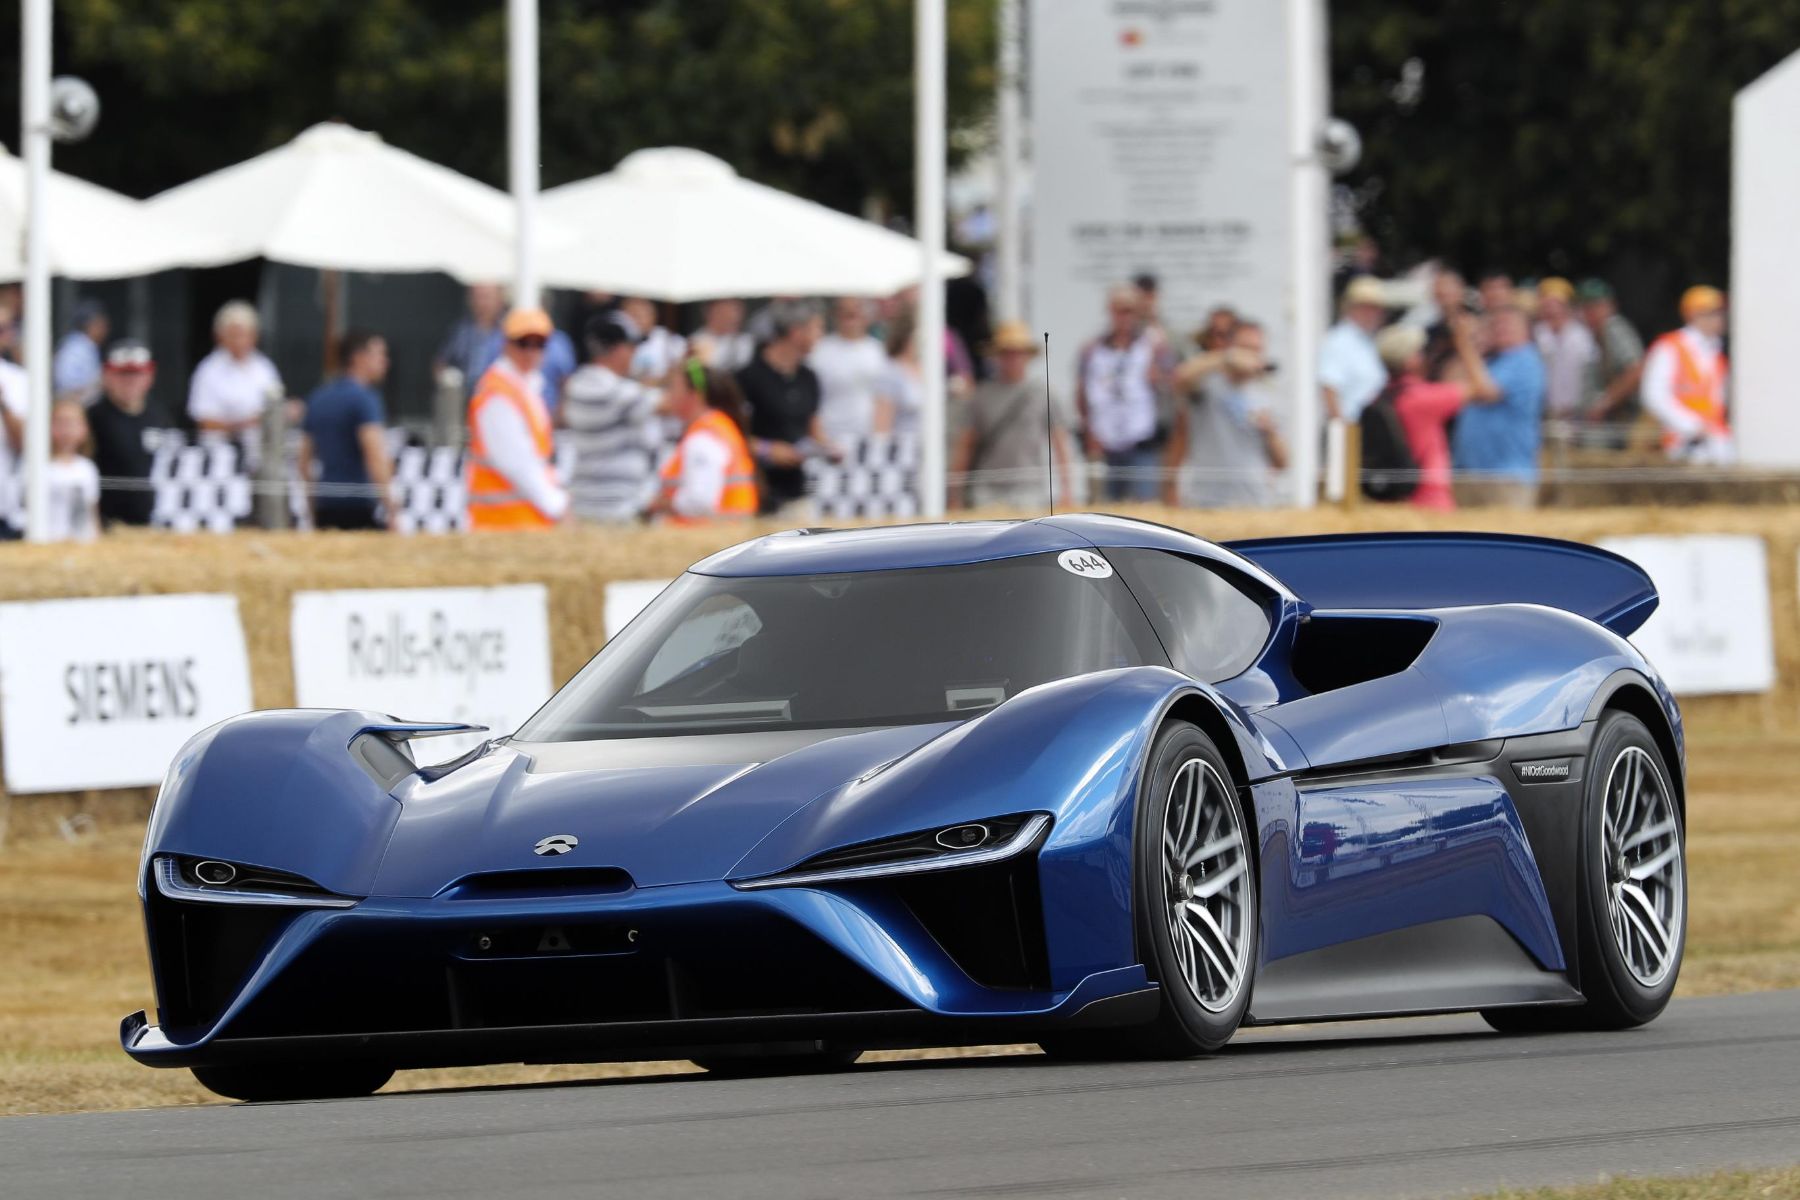 Fast forward: the story of the electric supercar